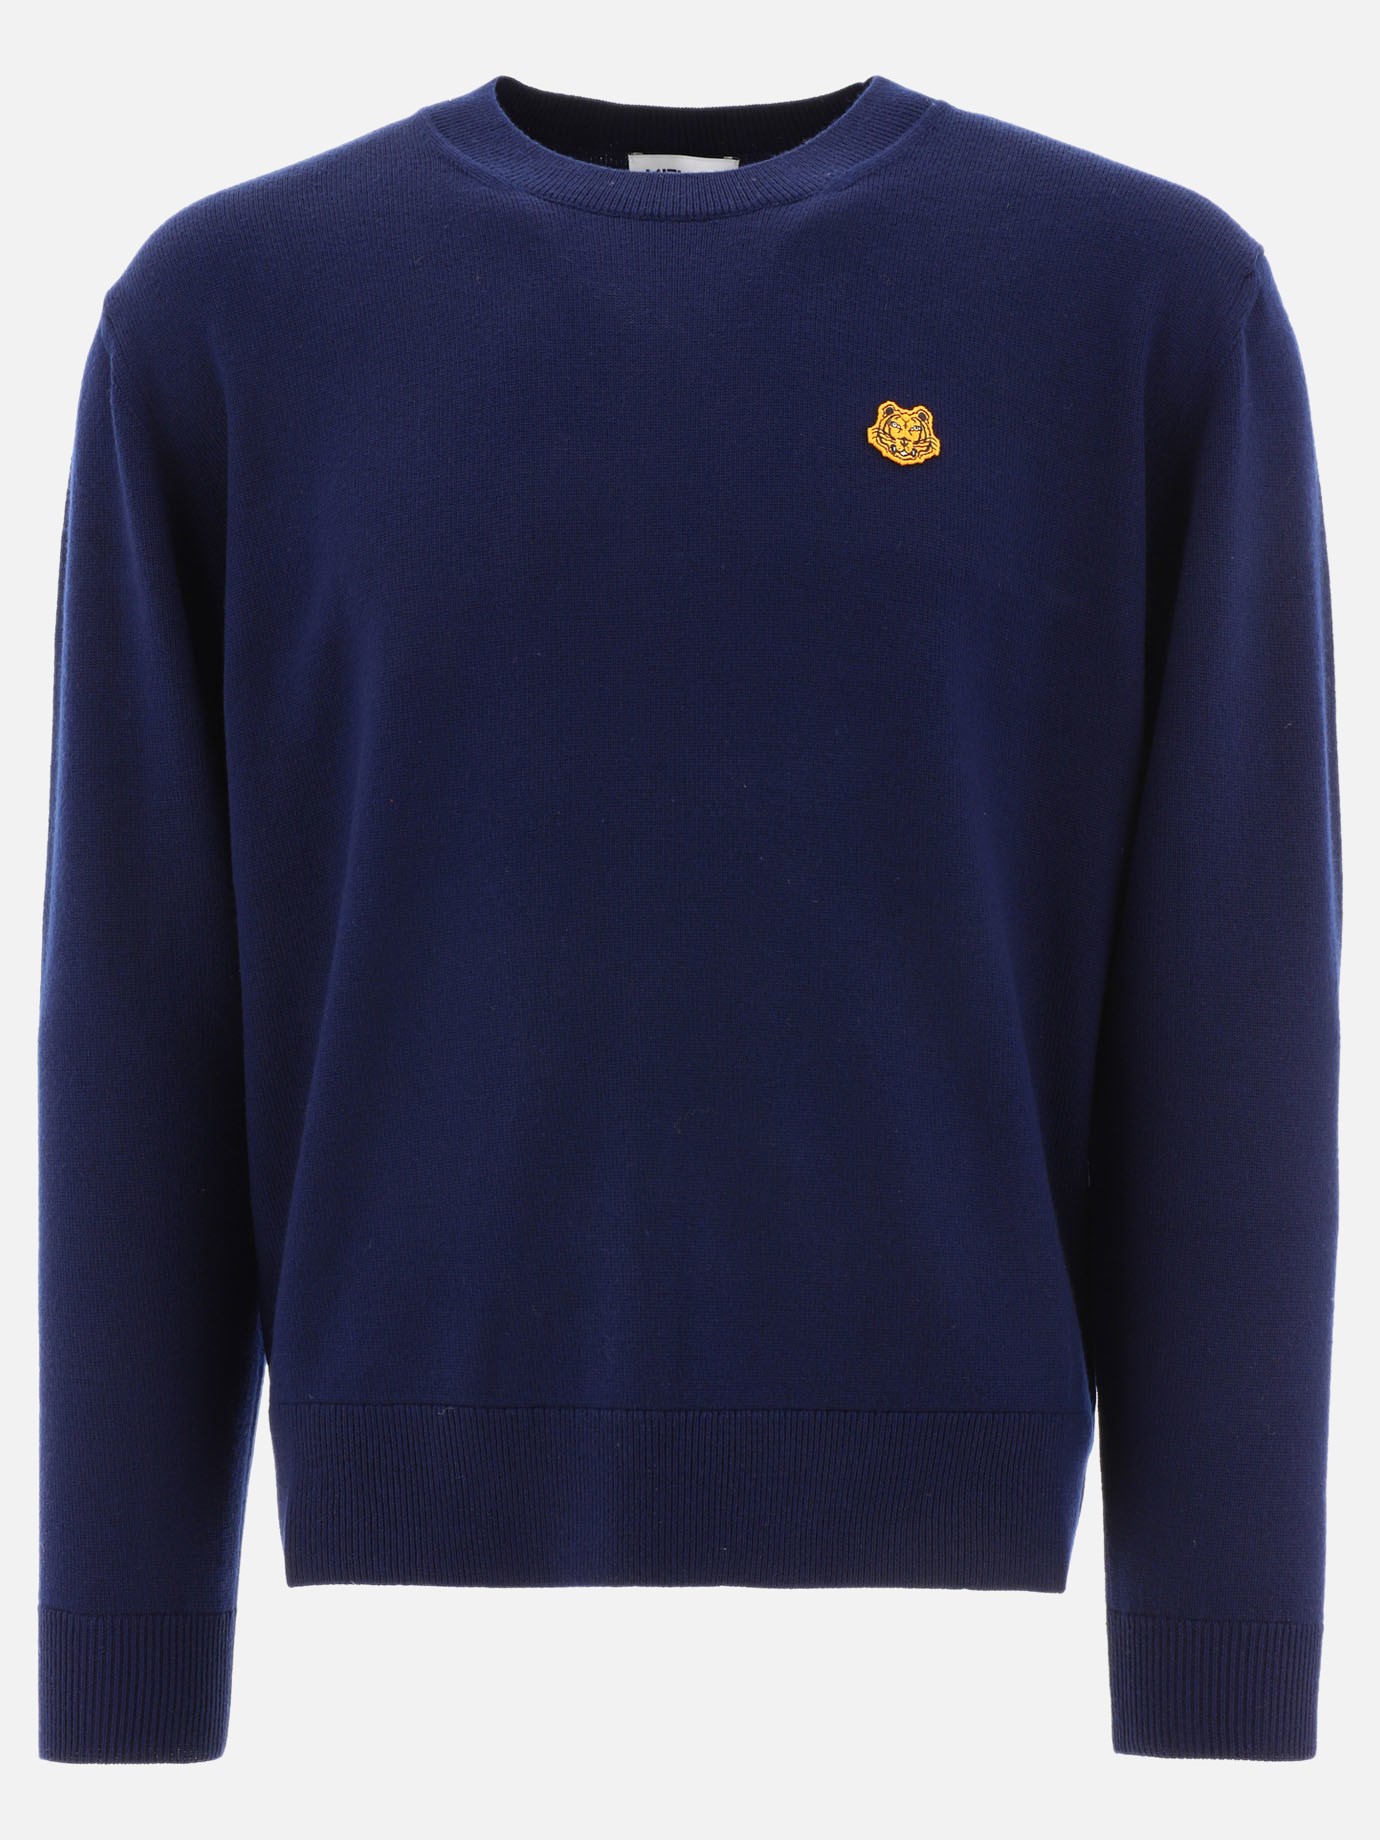  Tiger Crest  sweaterby Kenzo - 1